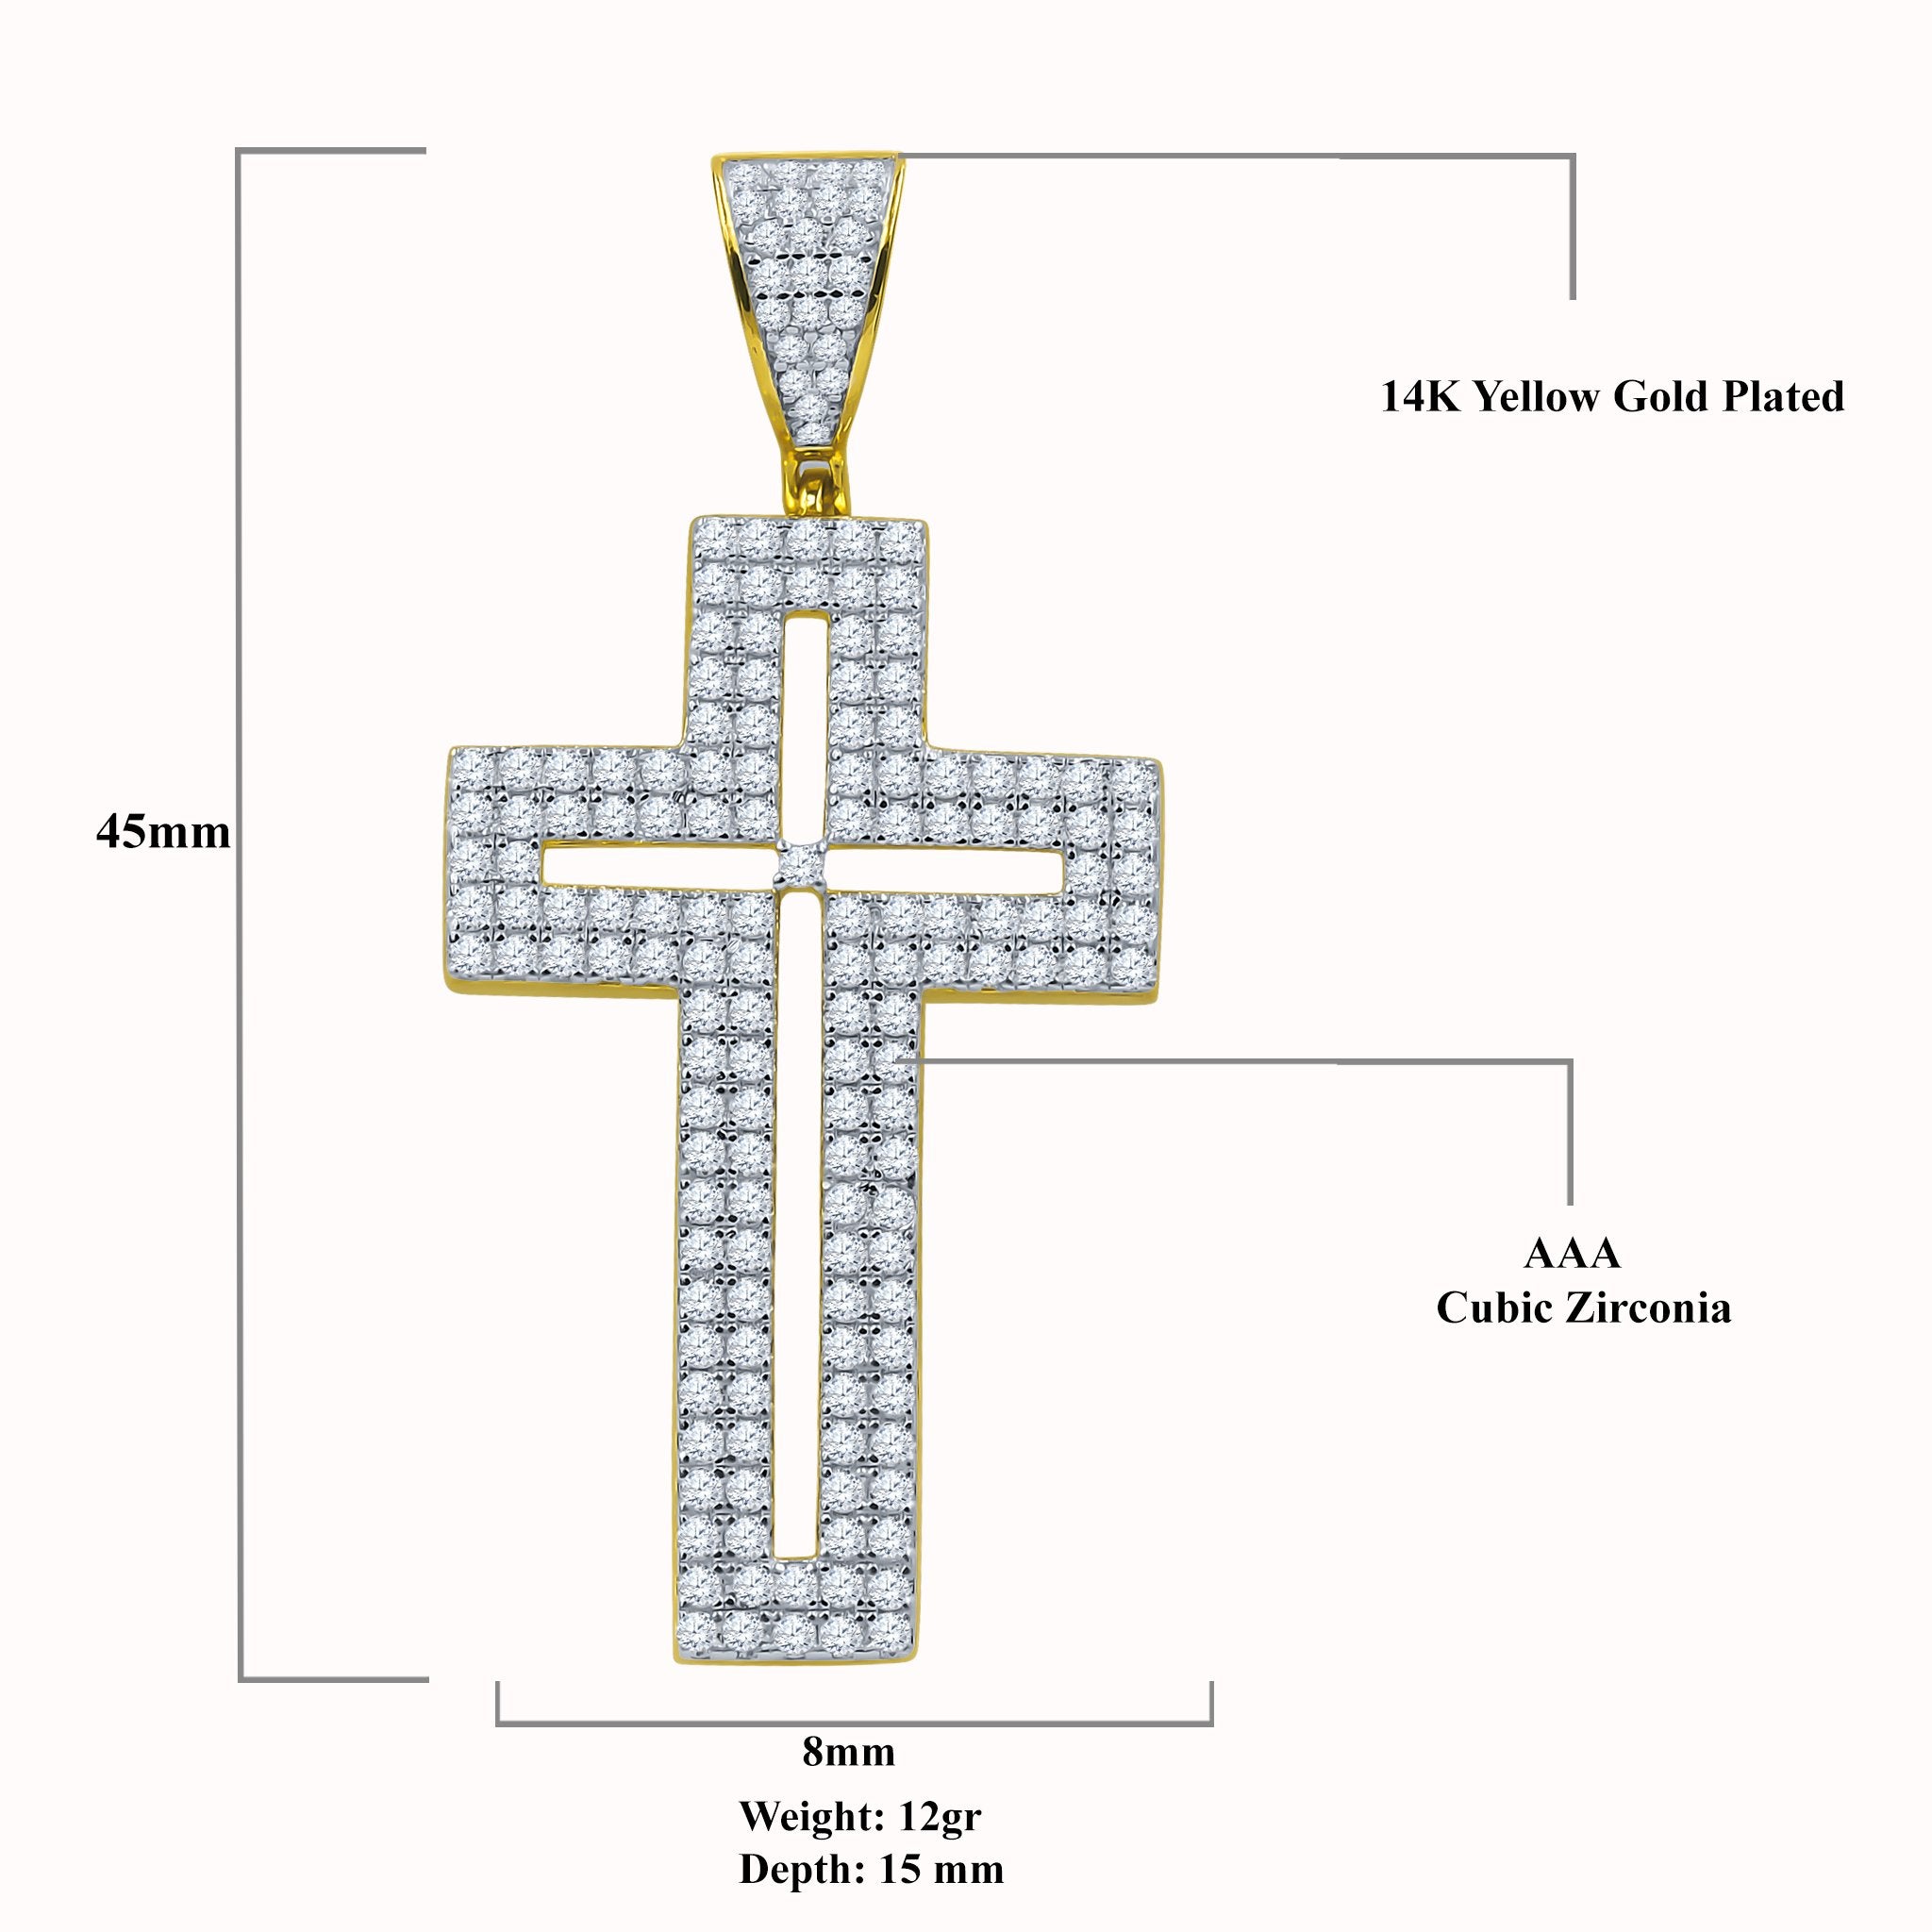 Resilient Love CZ Silver Cross Pendant - 925 Sterling Silver, 45mm Length, 12g Weight - Pendants, Stones & Charms - Bijou Her -  -  - 